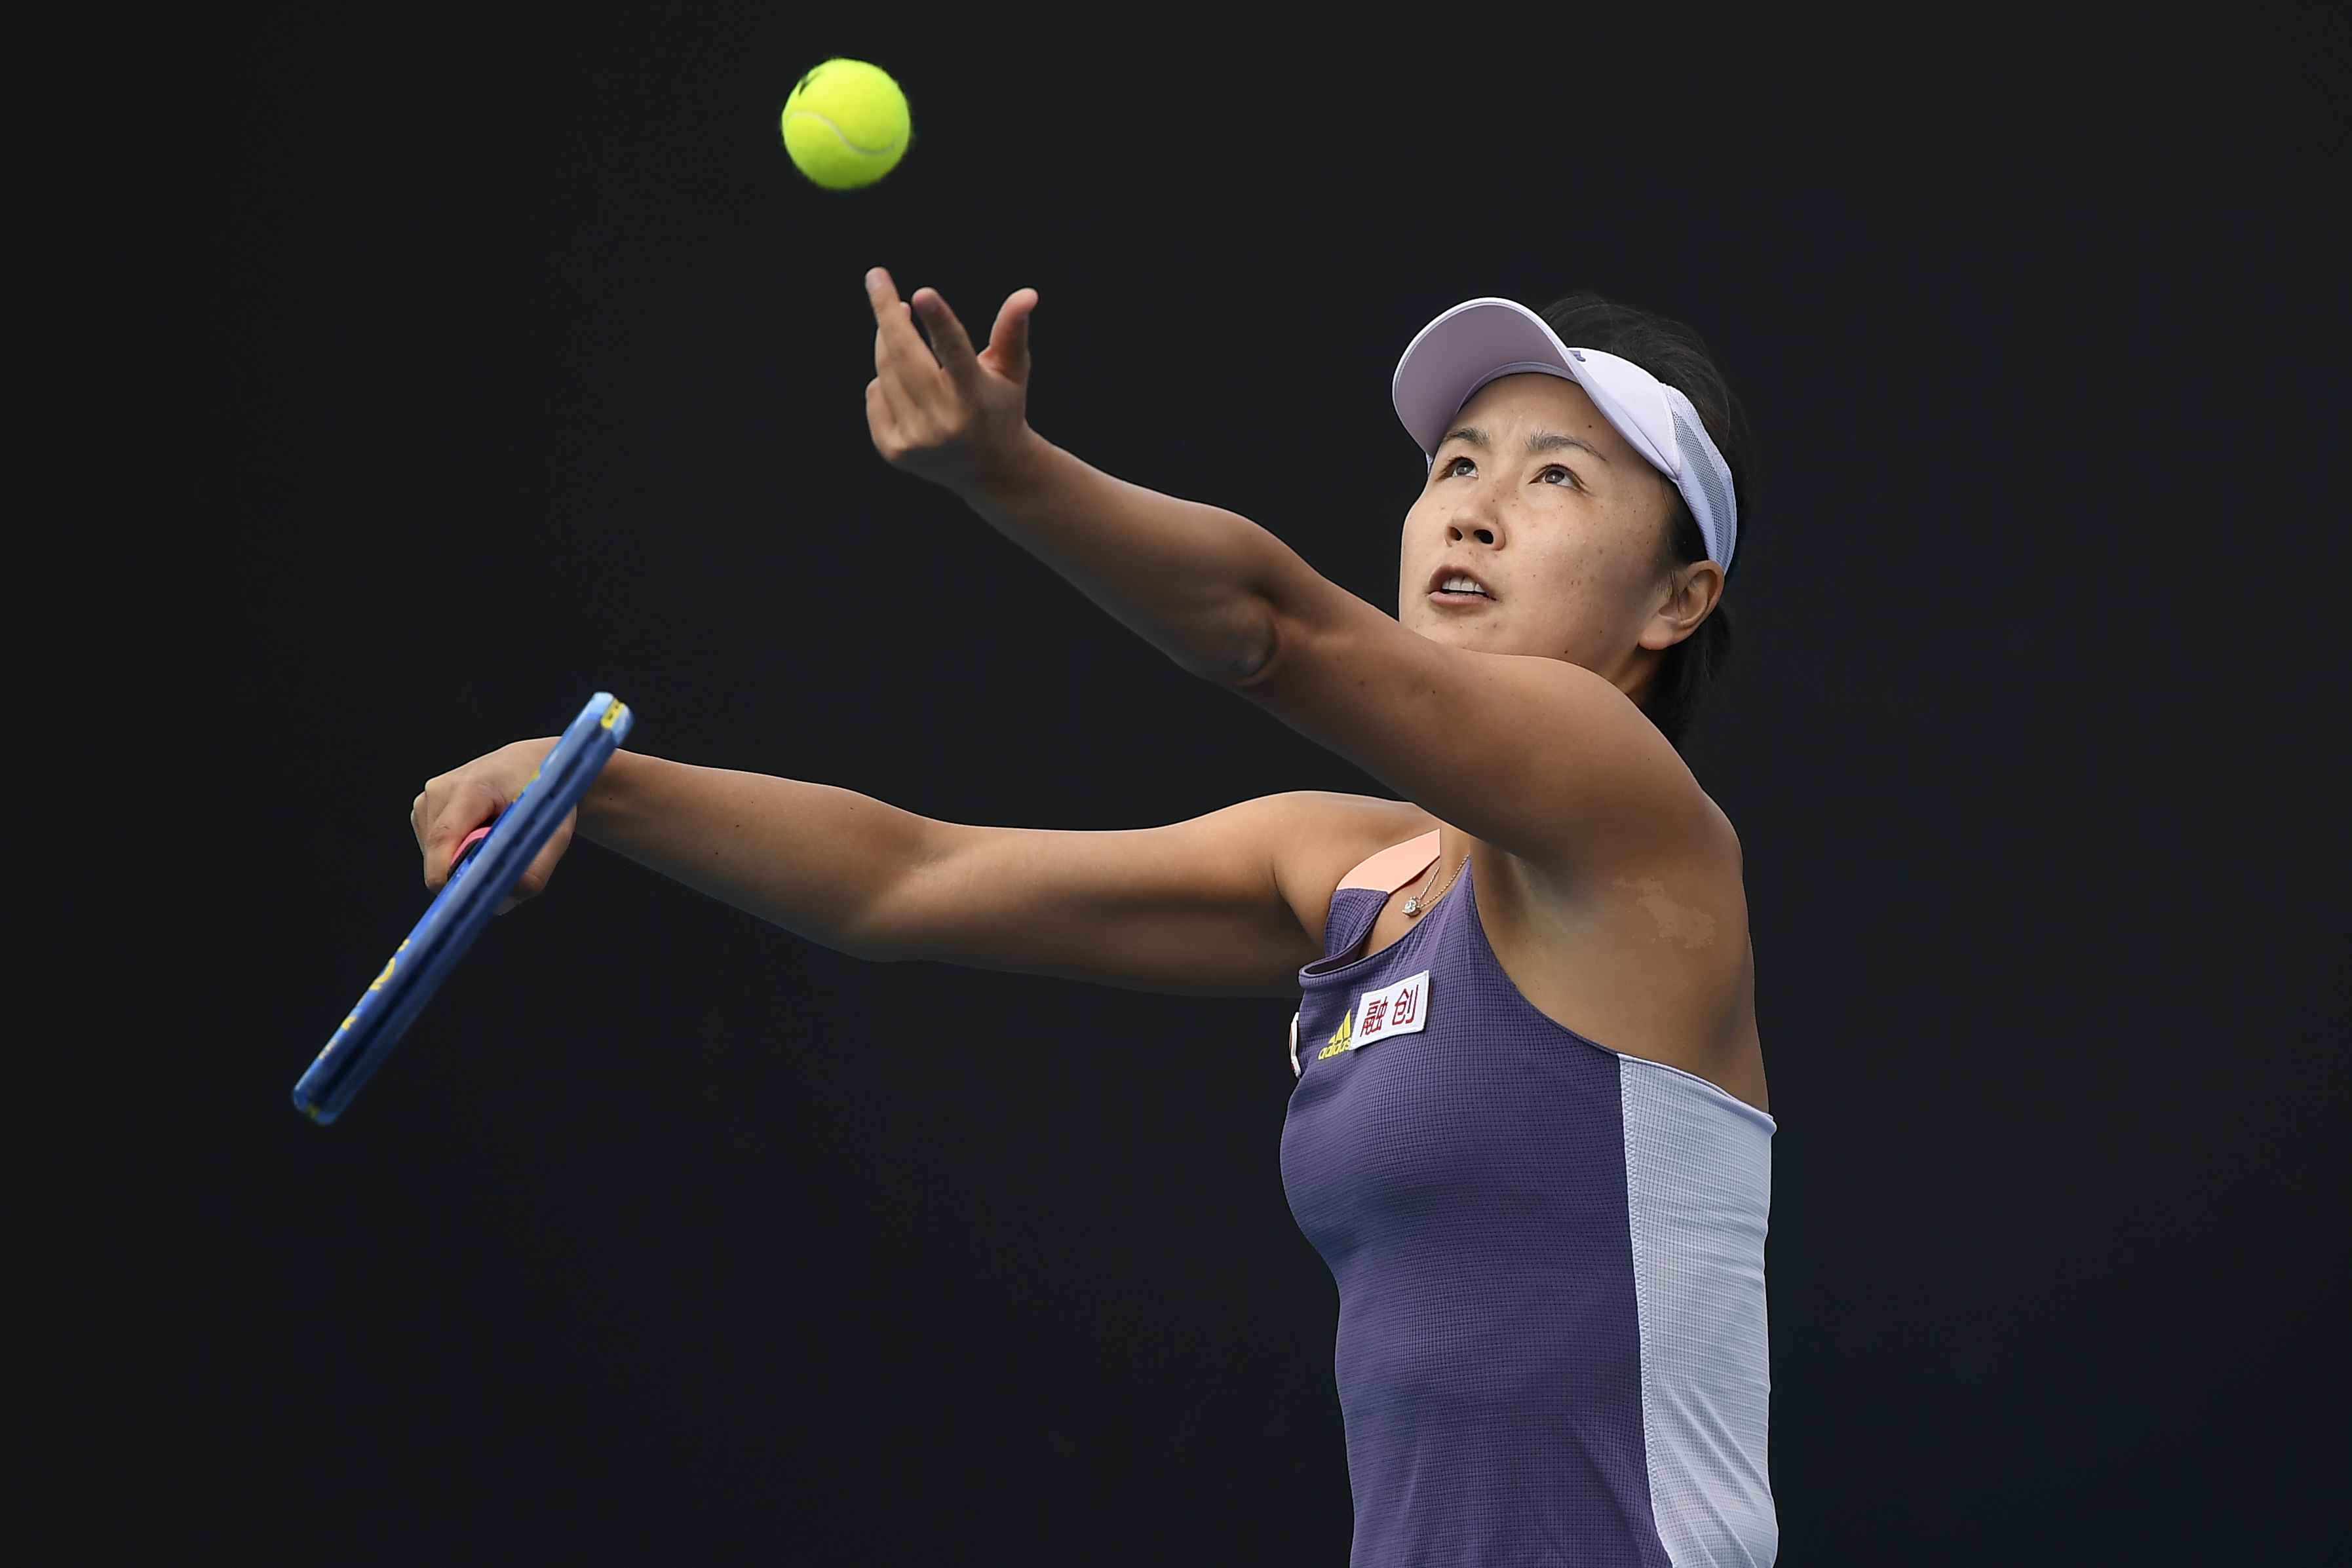 Peng Shuai prepares to serve the ball in a first-round match at the 2020 Australian Open on January 21, 2020, in Melbourne, Australia.